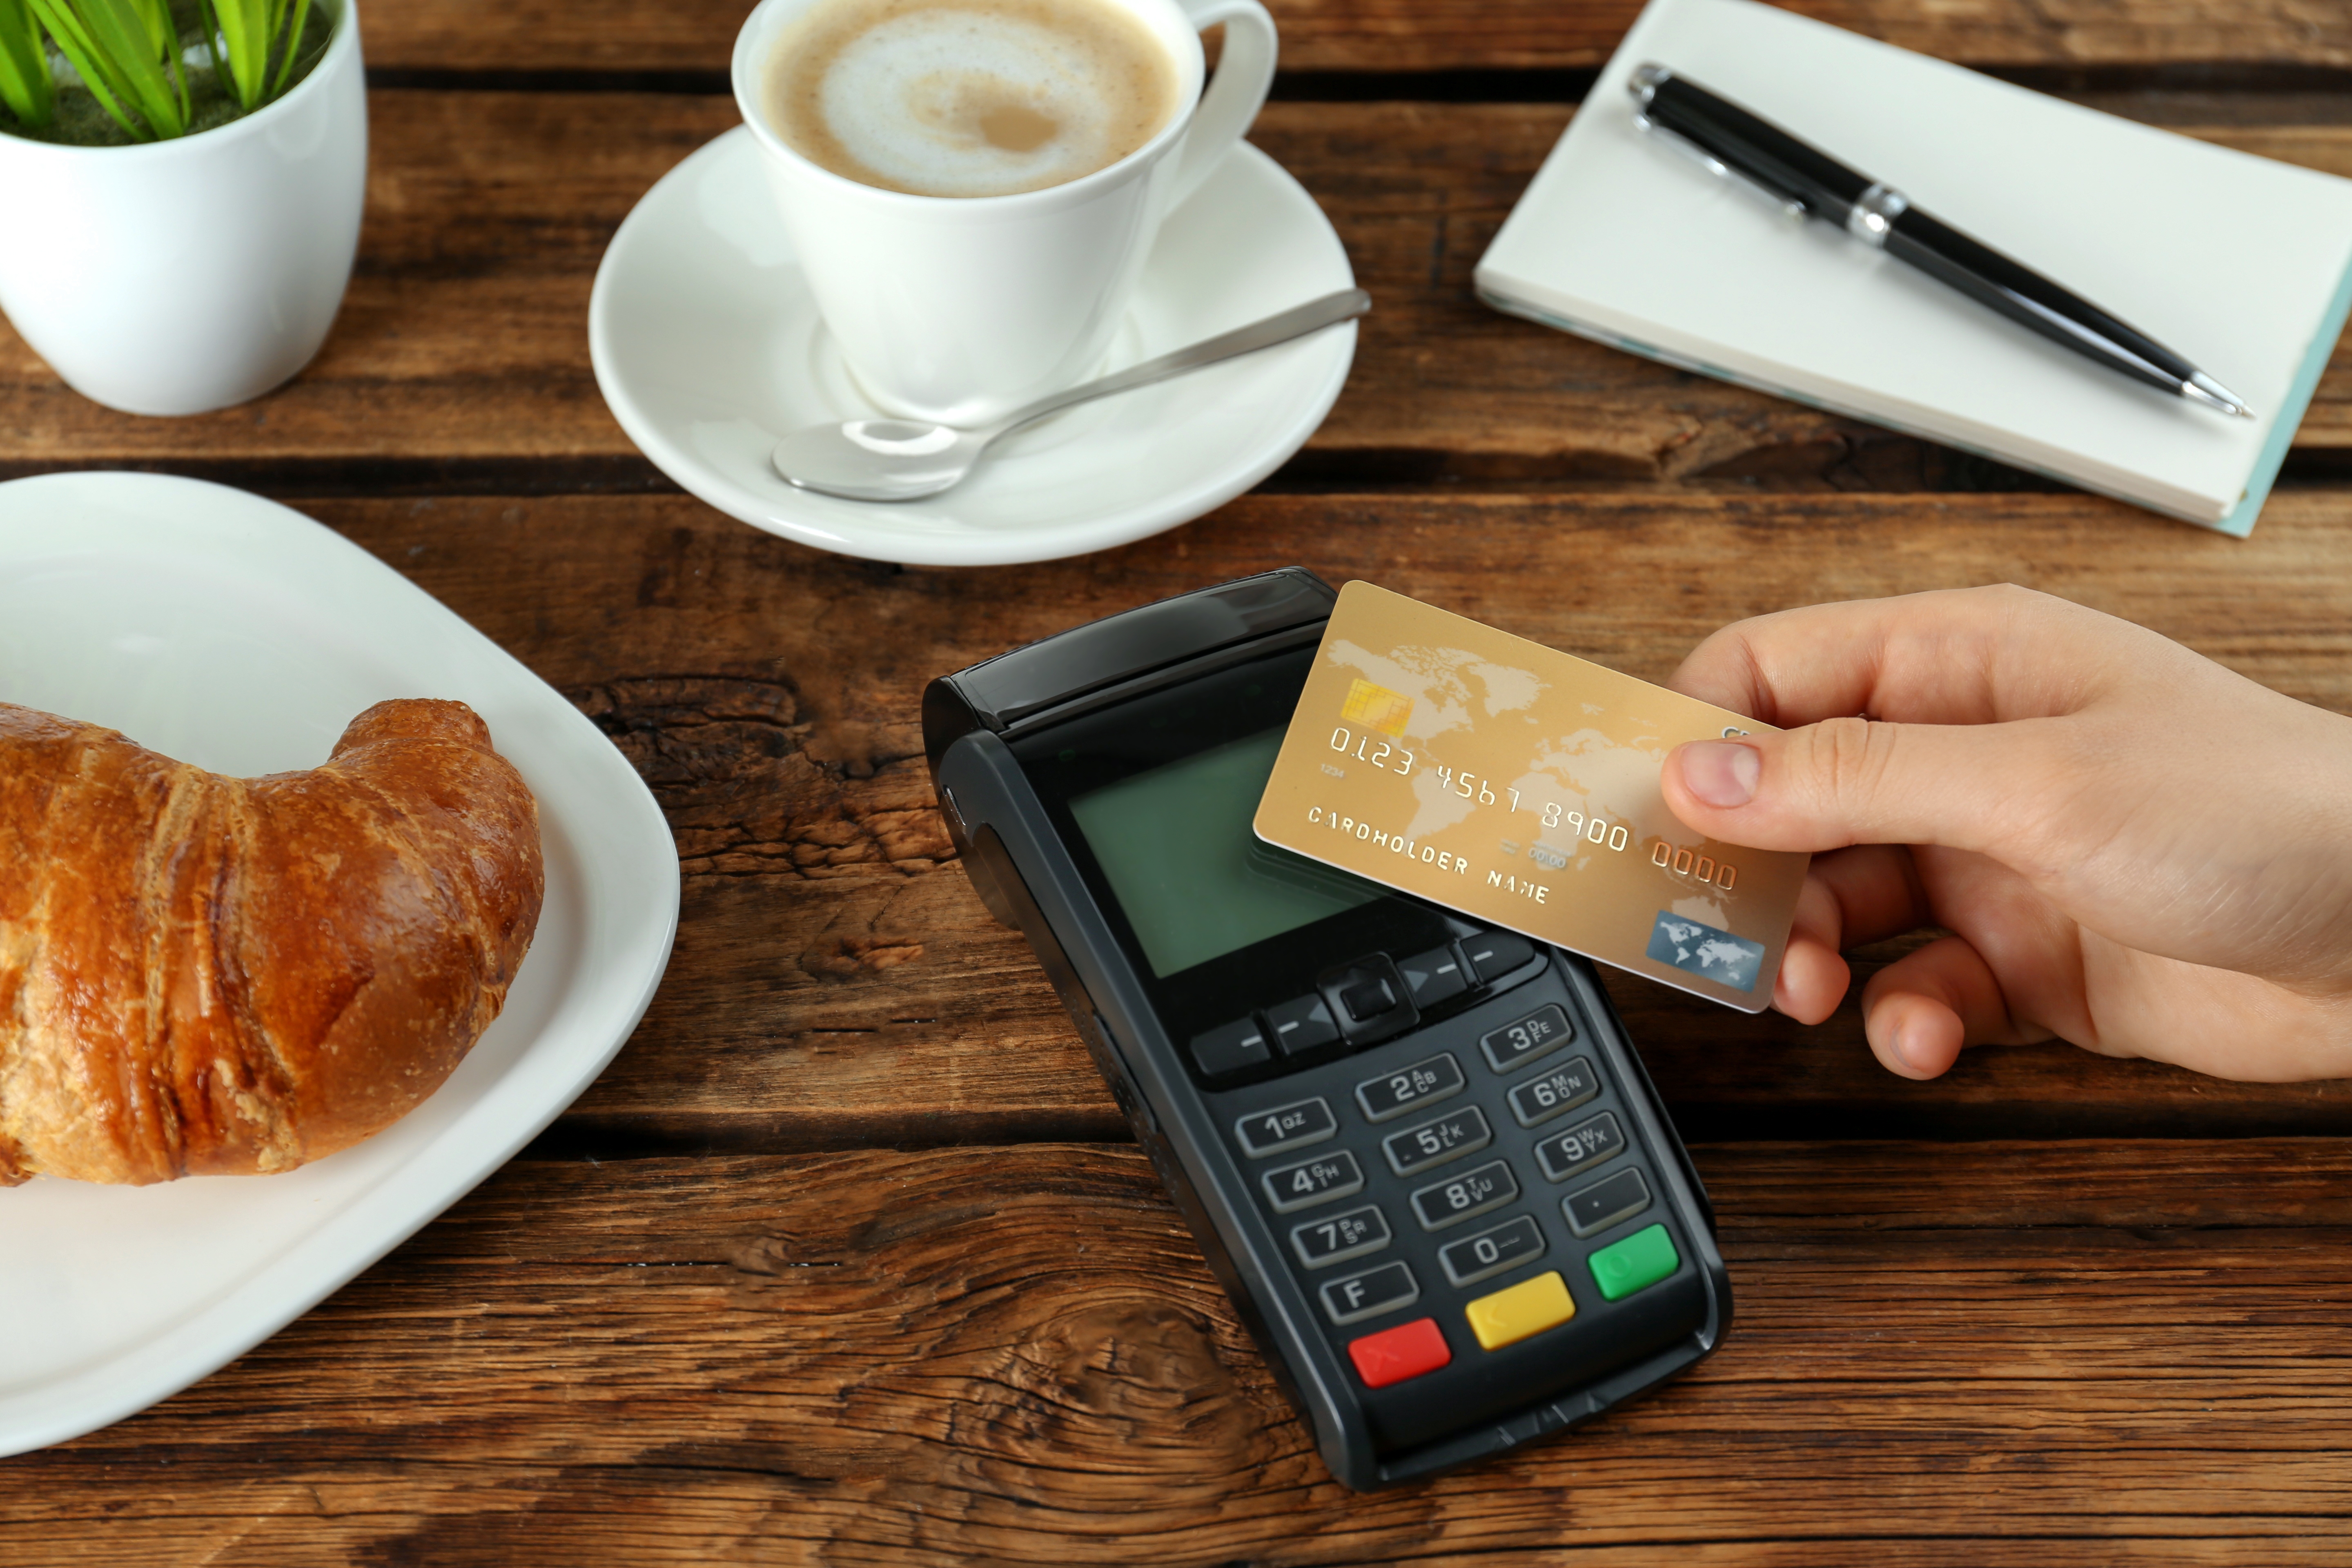 A person paying with a card | Source: Shutterstock